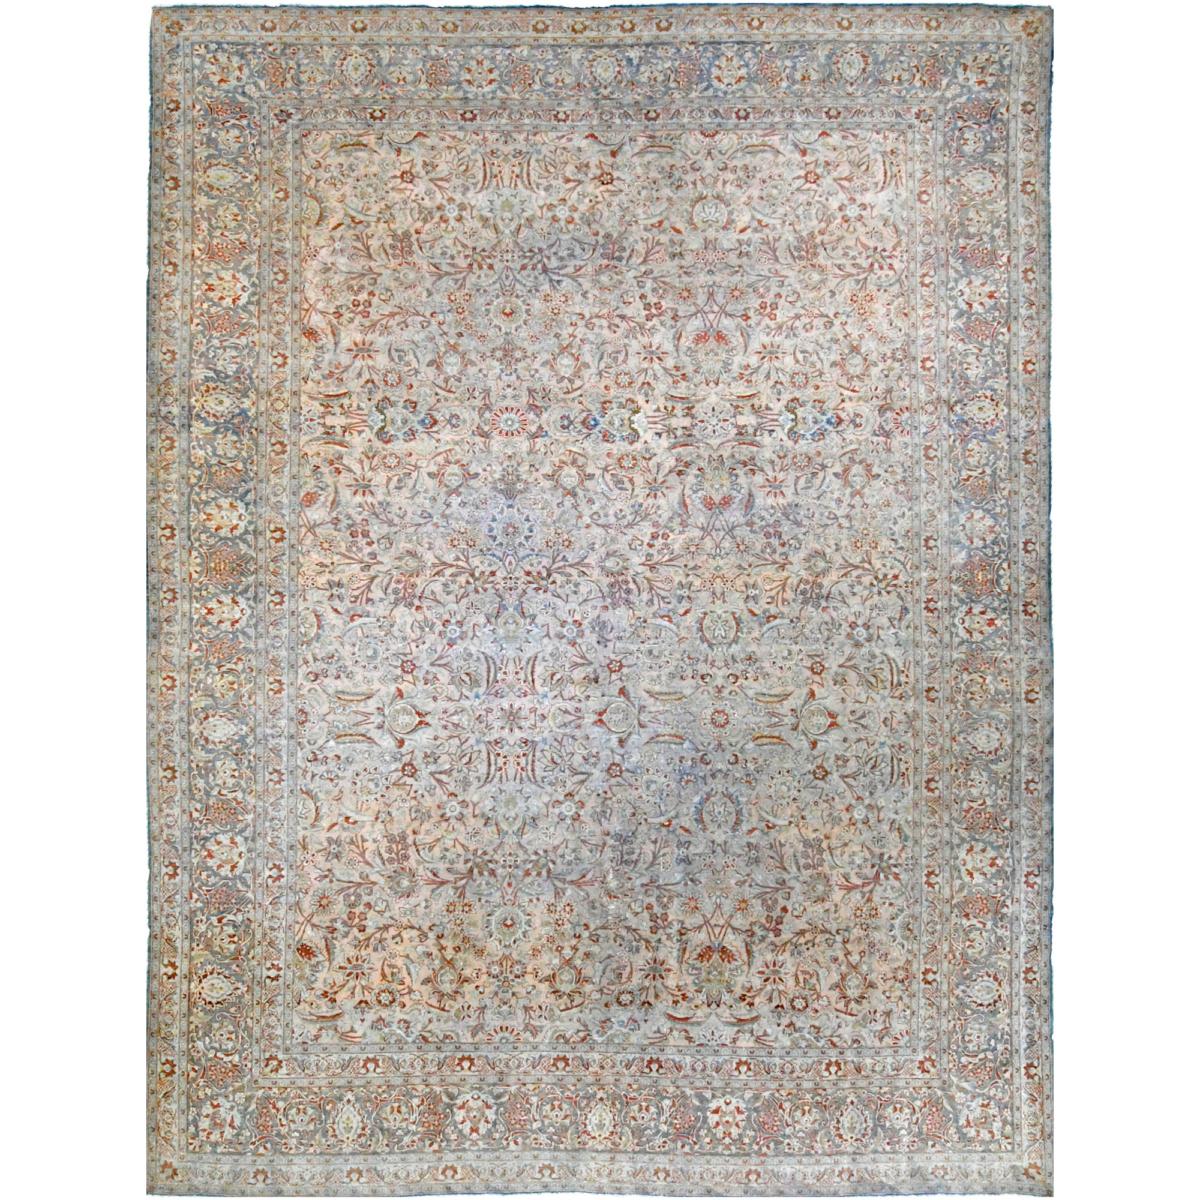 Circa: 1920’s

Dimensions: 10’5 x 14’4

Material: 100% Wool Pile, Hand Knotted

Design: Persian, Mahal Weave, Fine Kashan

11778

Persian rugs and carpets of various types were woven in parallel by nomadic tribes in village and town workshops, and